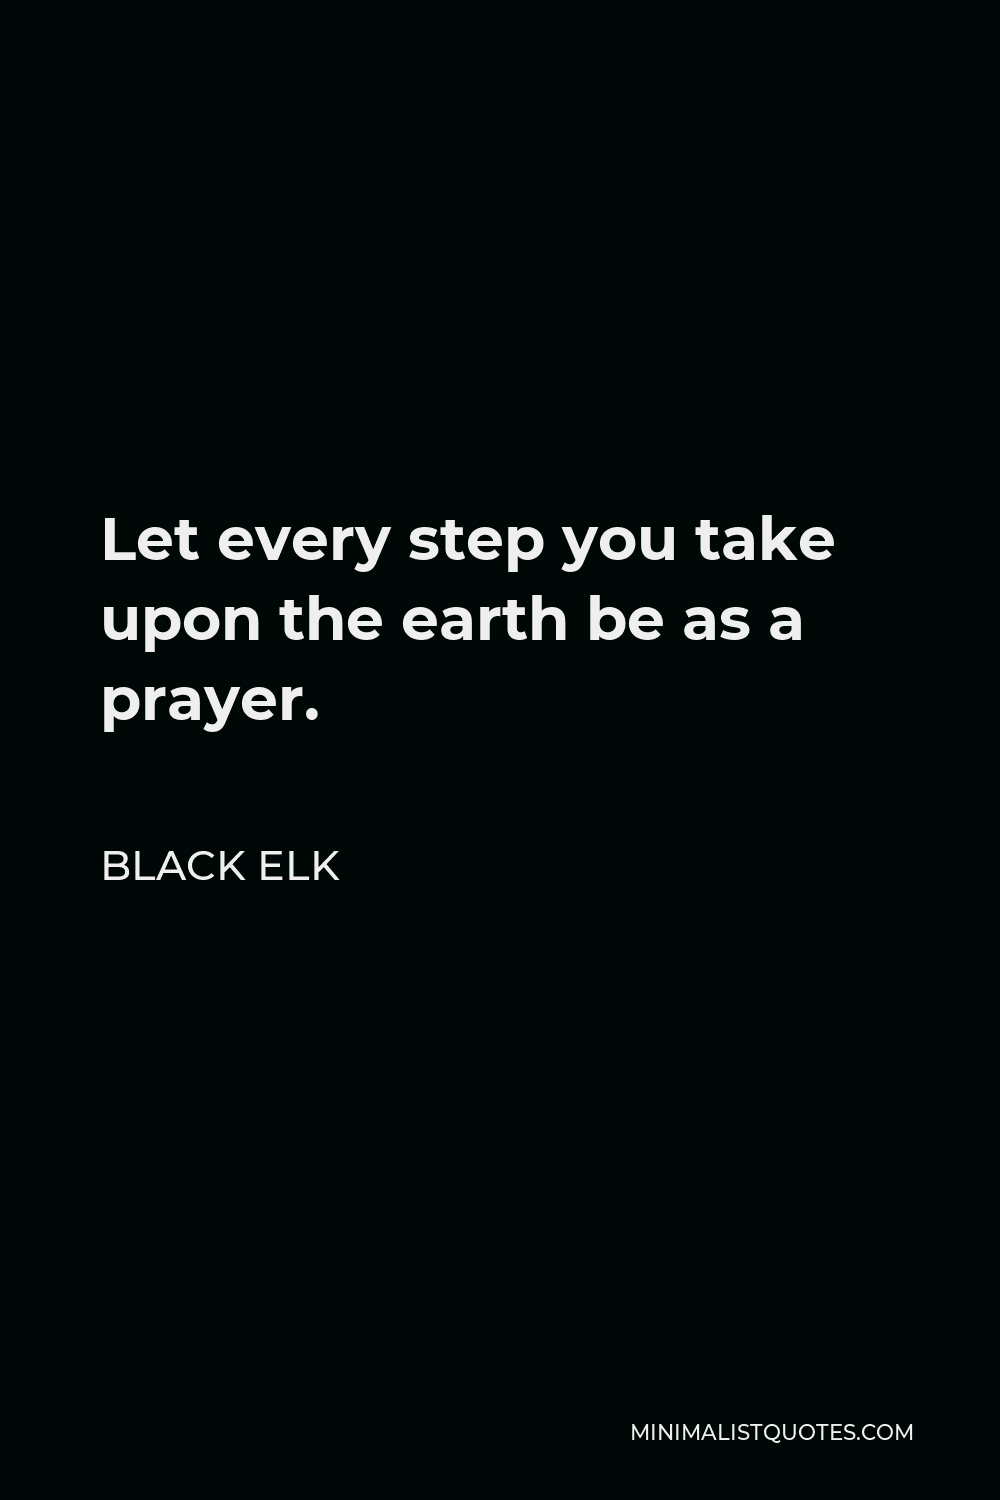 Black Elk Quote - Let every step you take upon the earth be as a prayer.